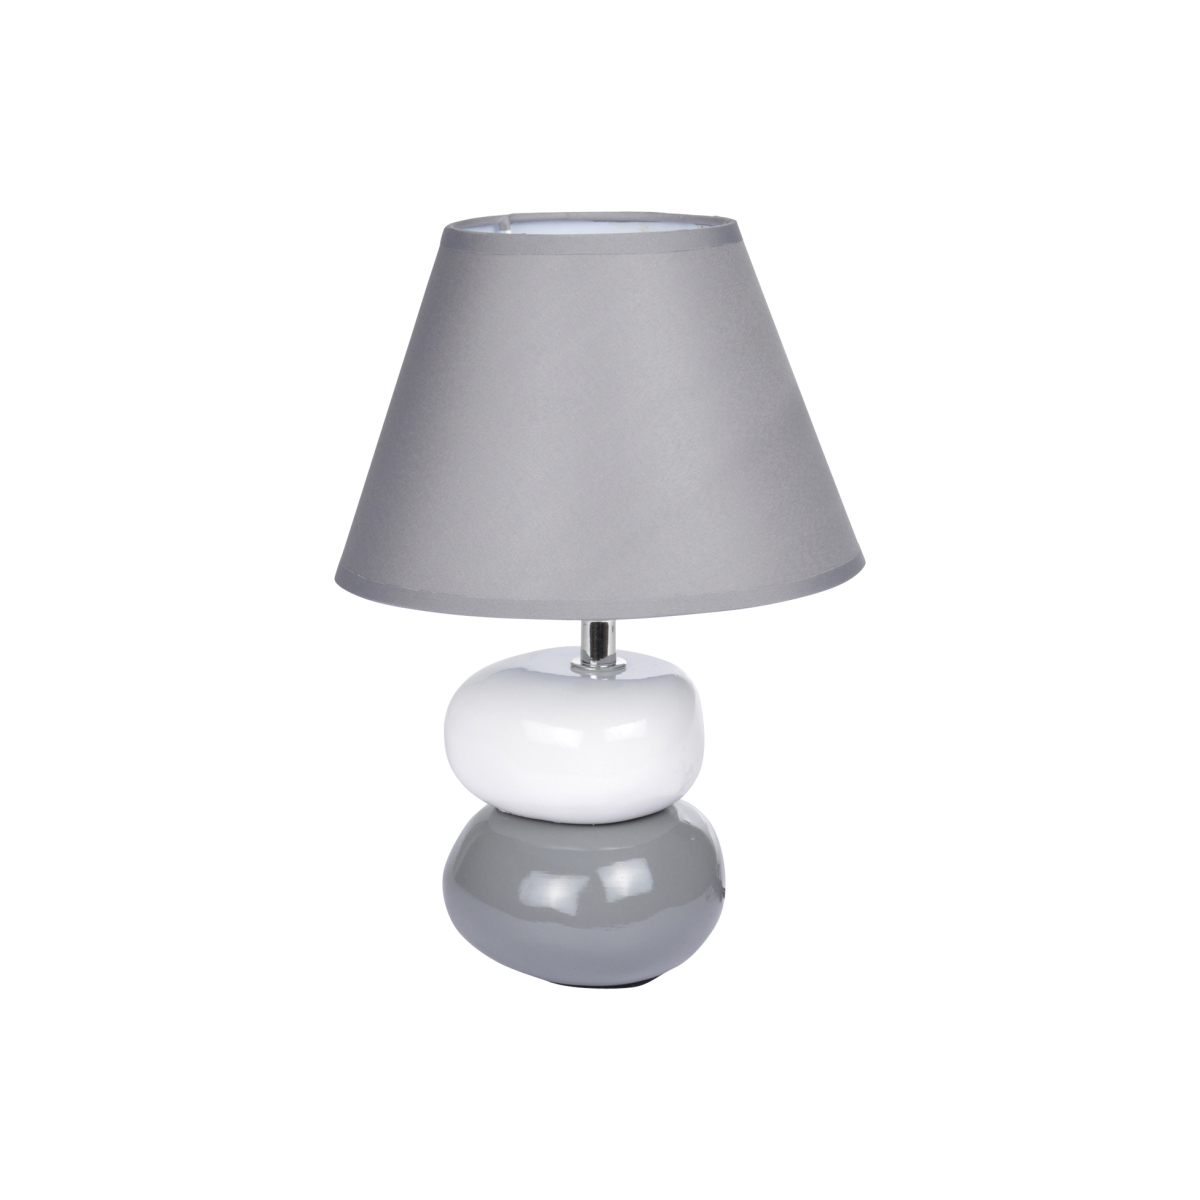 Lampe pied 2 galets